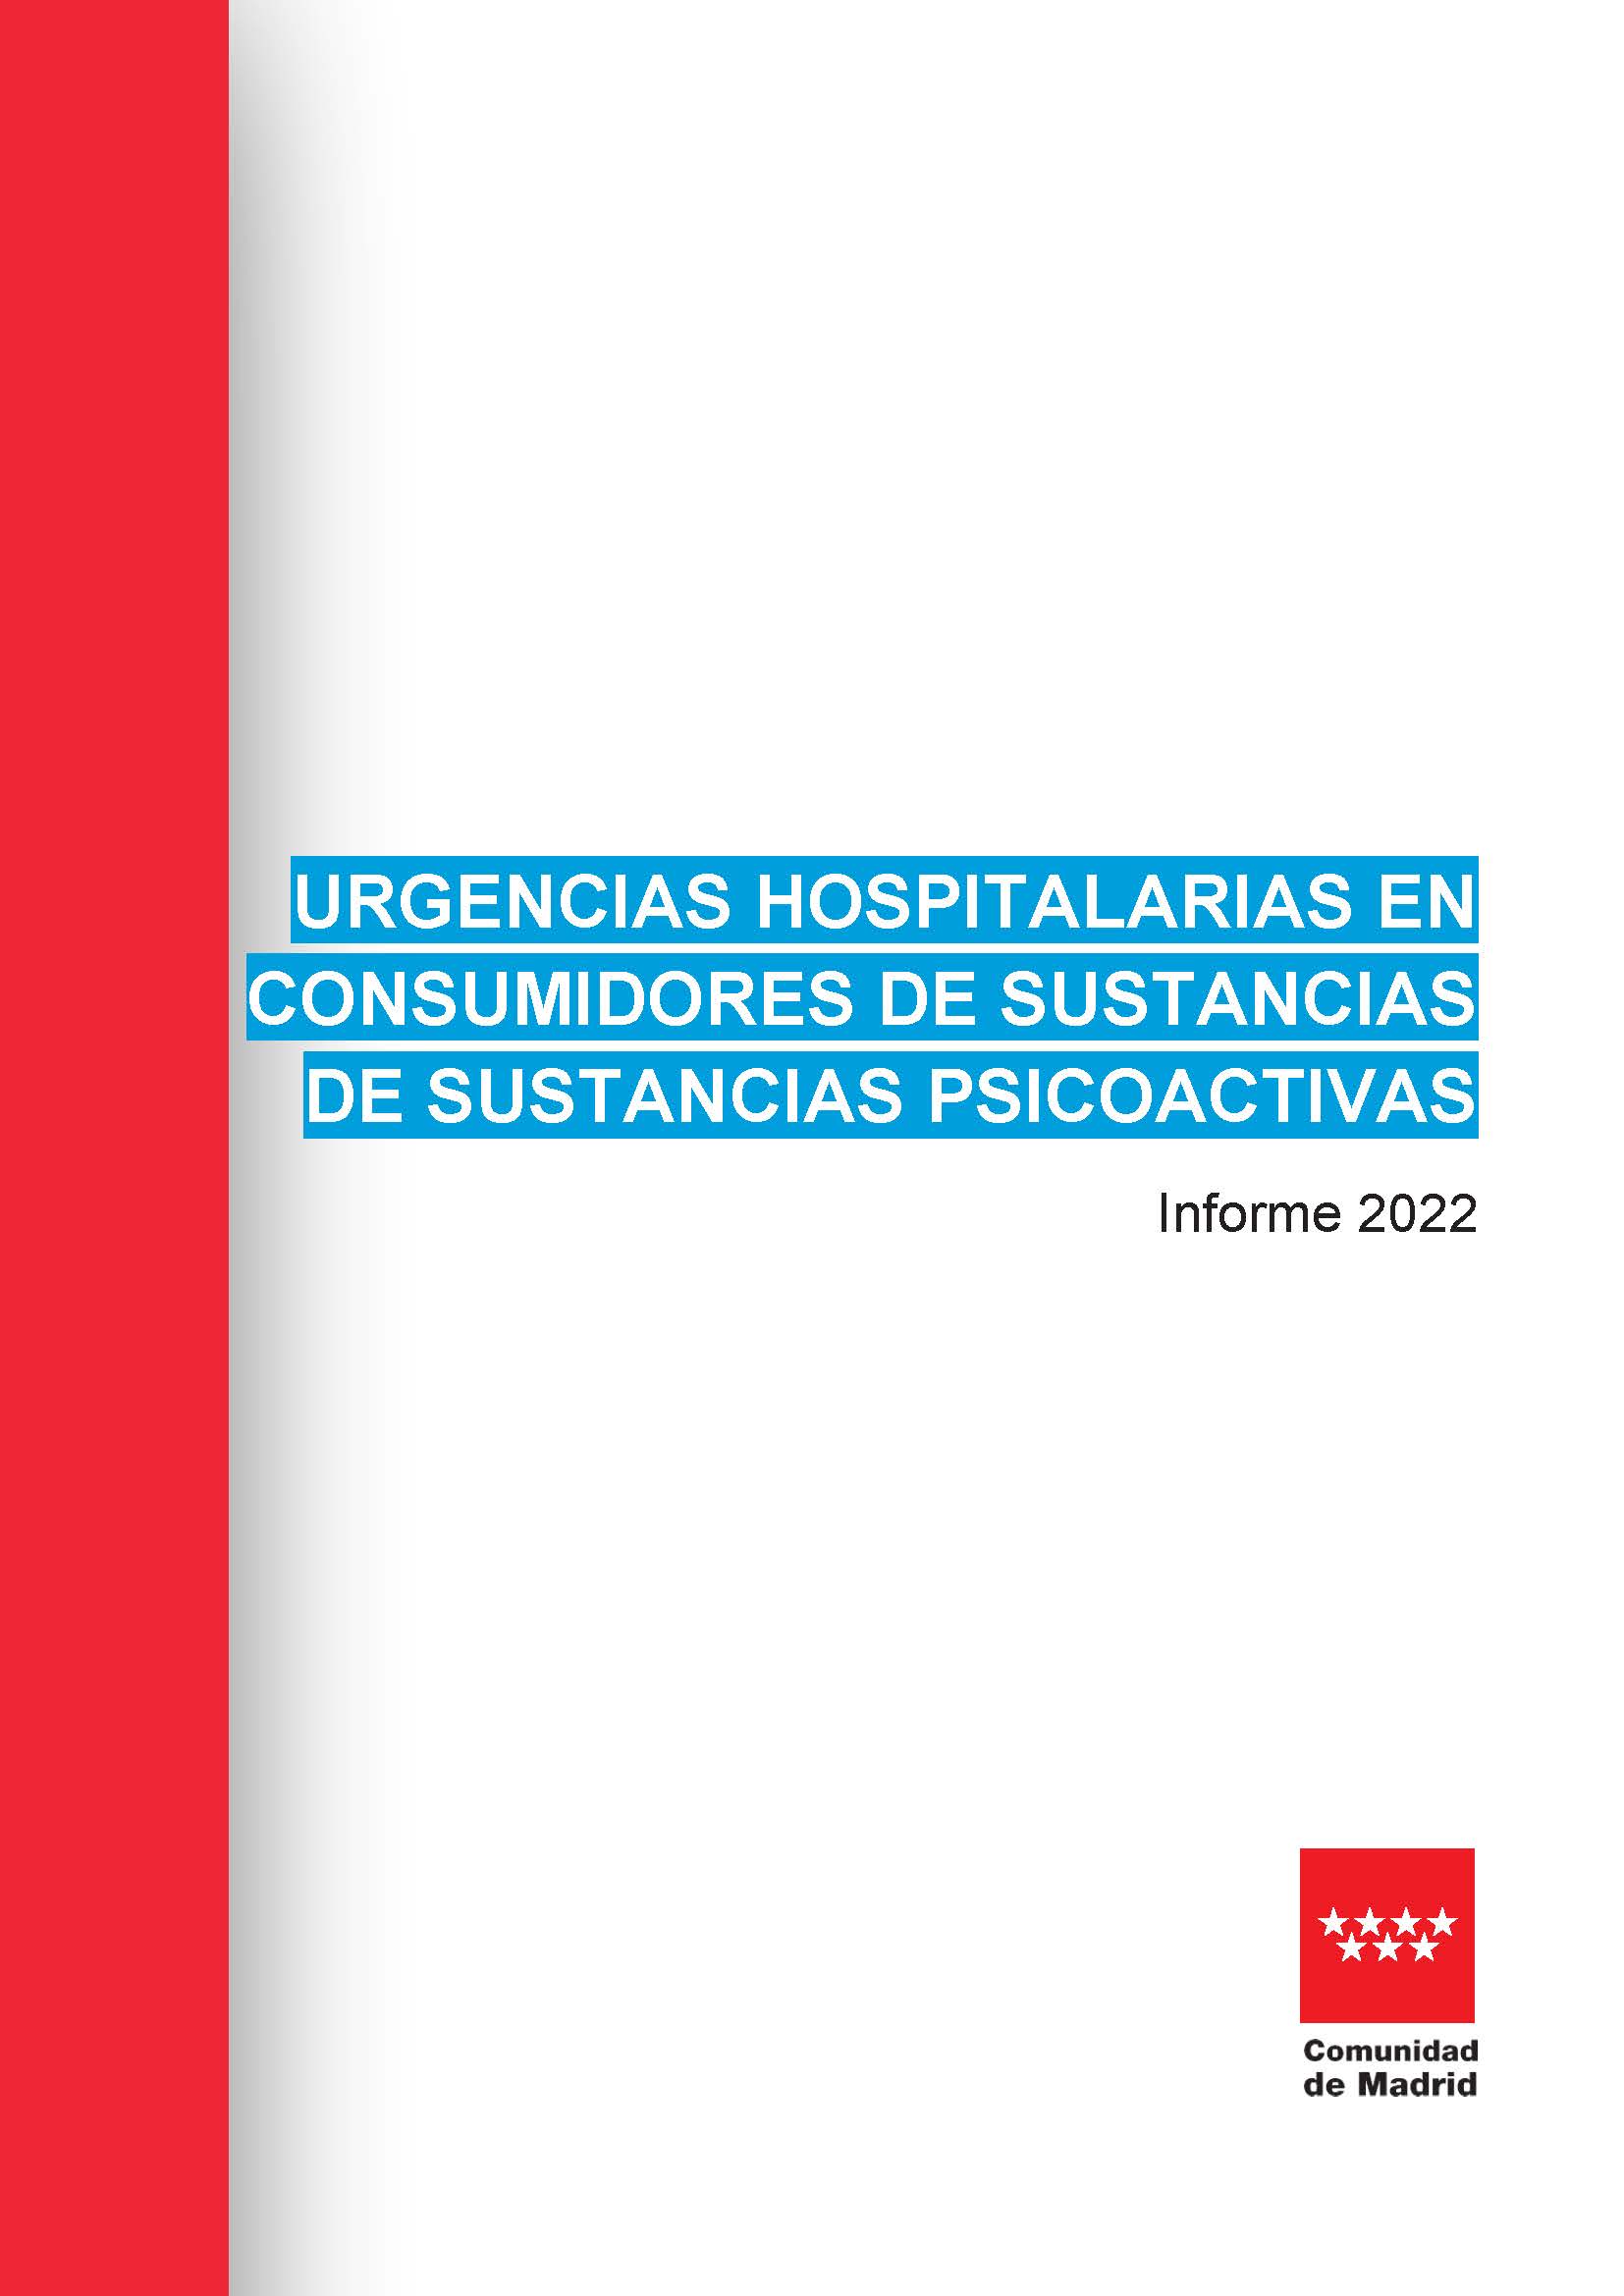 Cover of Hospital Emergencies in users of psychoactive substances in the Community of Madrid. Year 2022